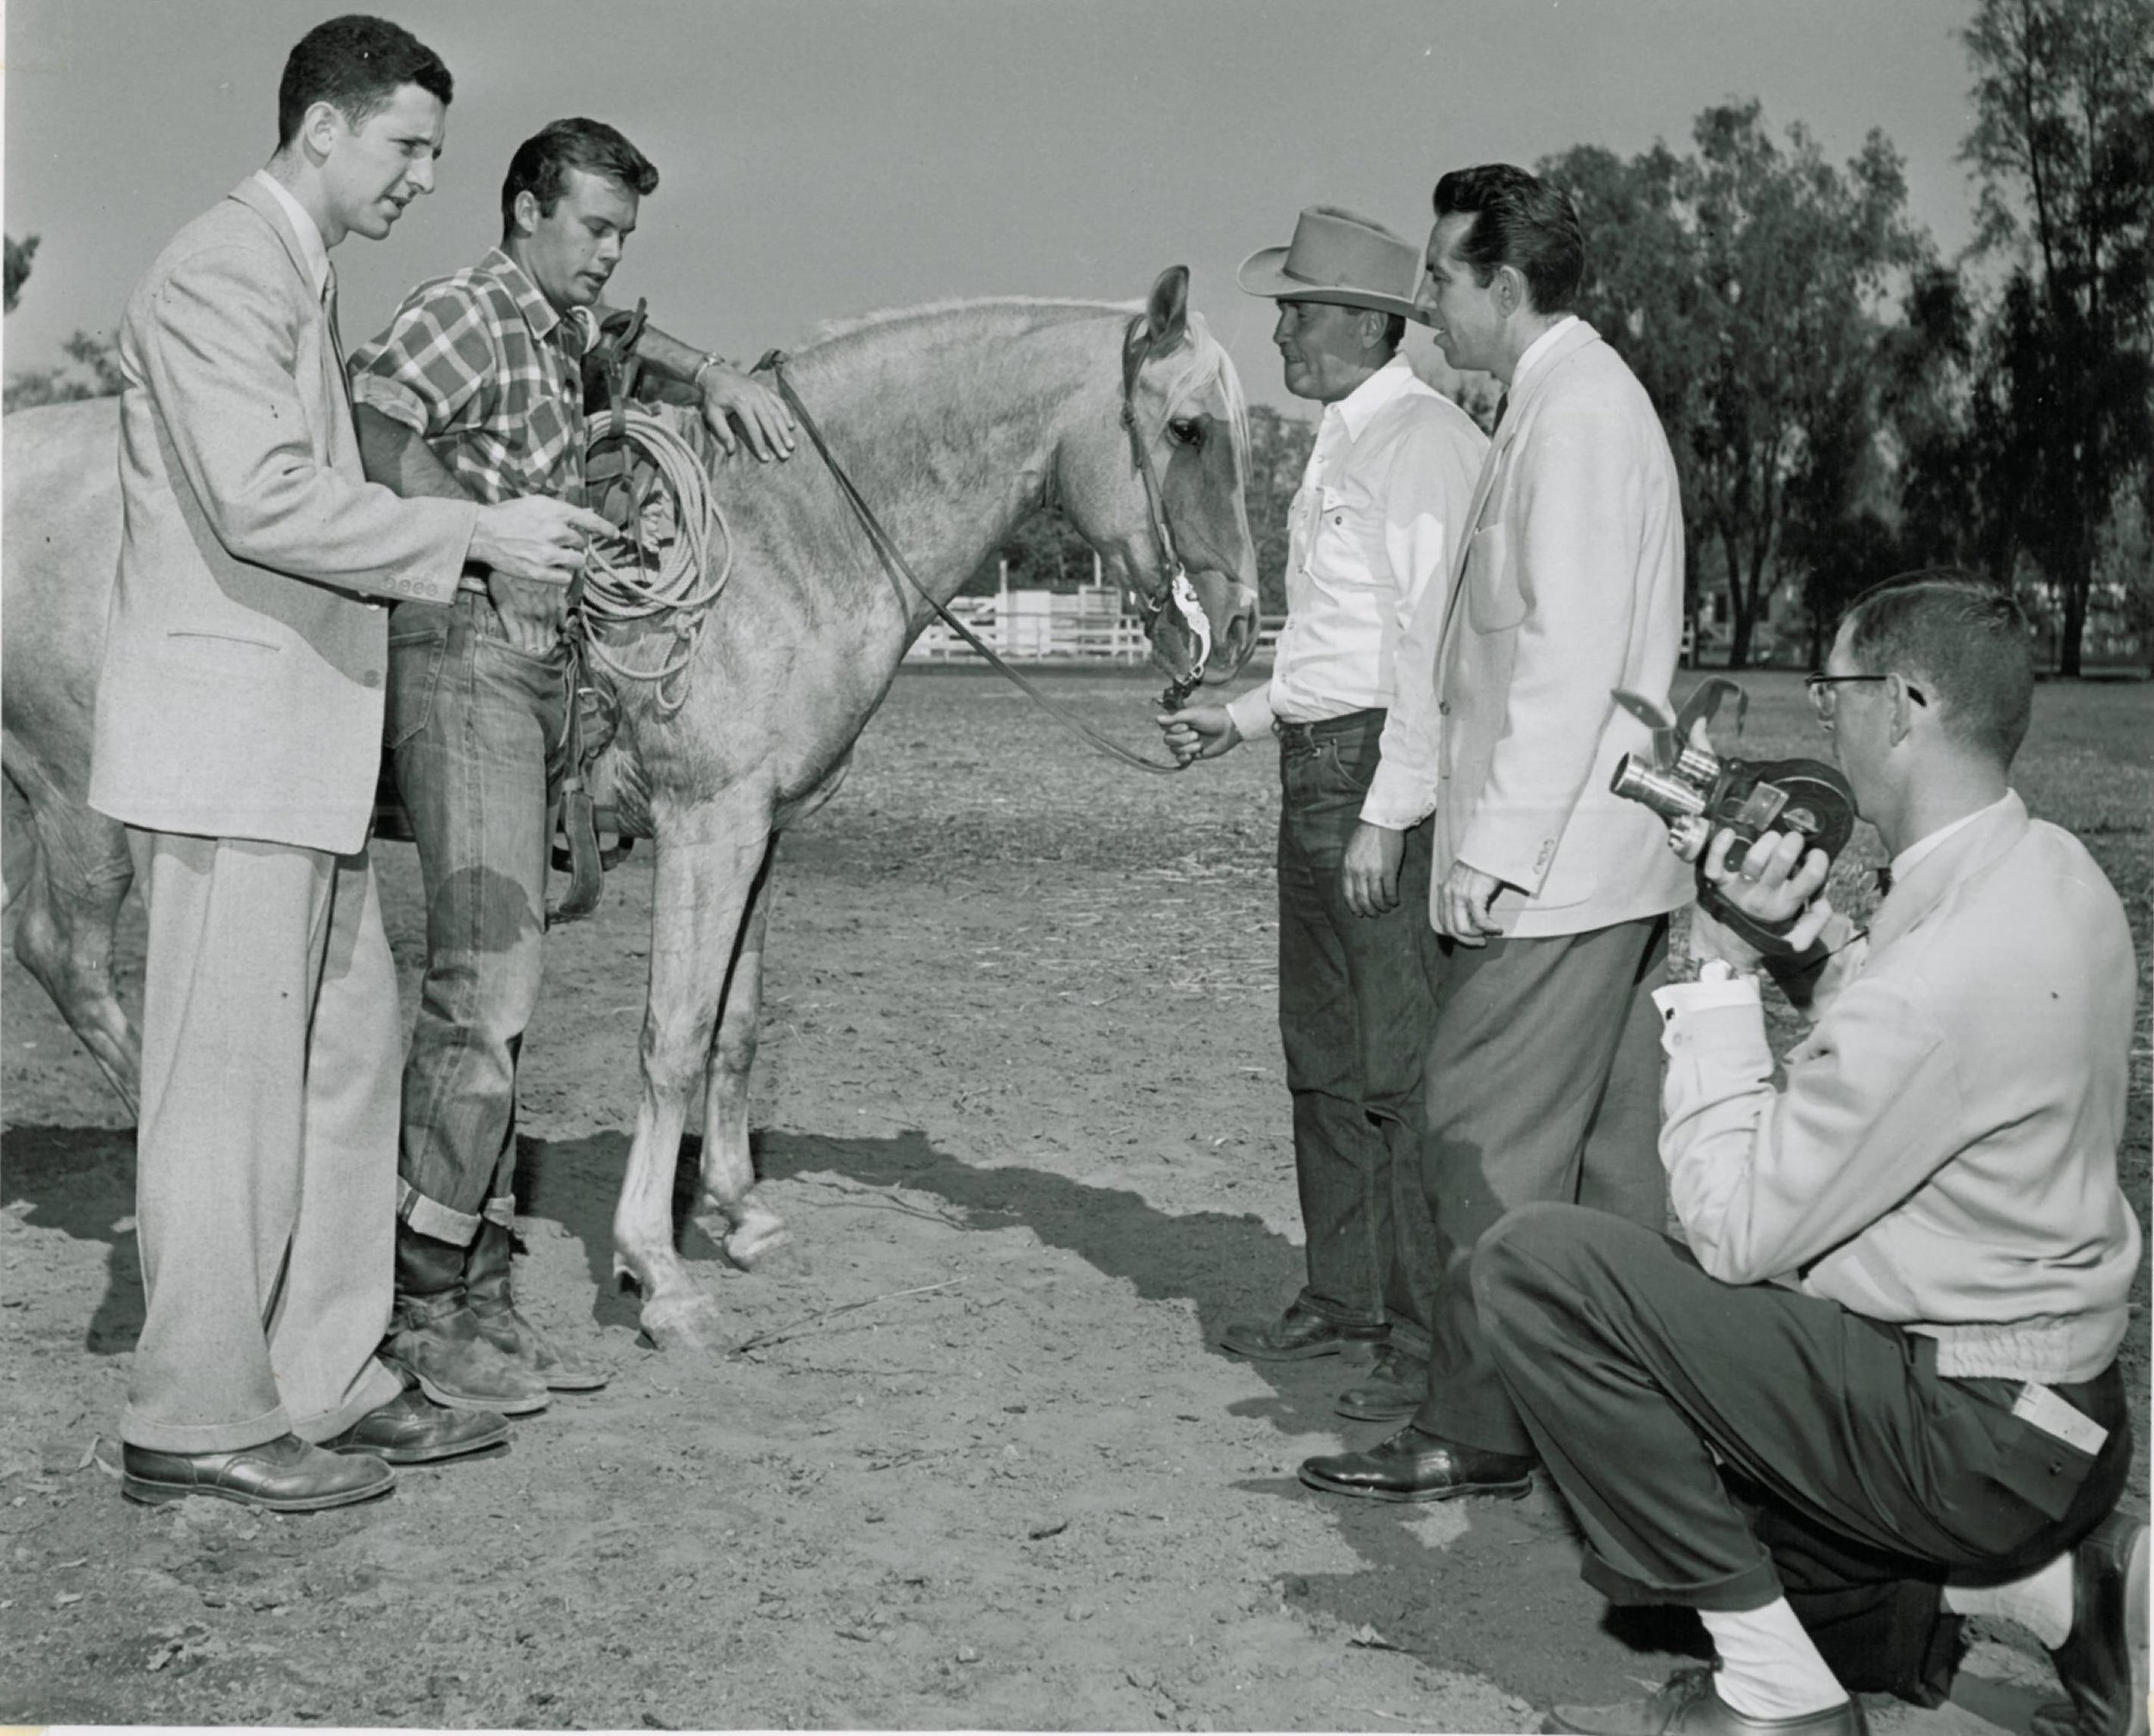  Dec. 29, 1954  Four (4) photographs of Bob with (1) cameraman (movie) and others (unidentified) from, probably, Columbia Pictures, (2) and (3) riding the Palomino, and (4) outtake of Bob swished by horse’s tail. All photographs labeled 12-29-54,  On